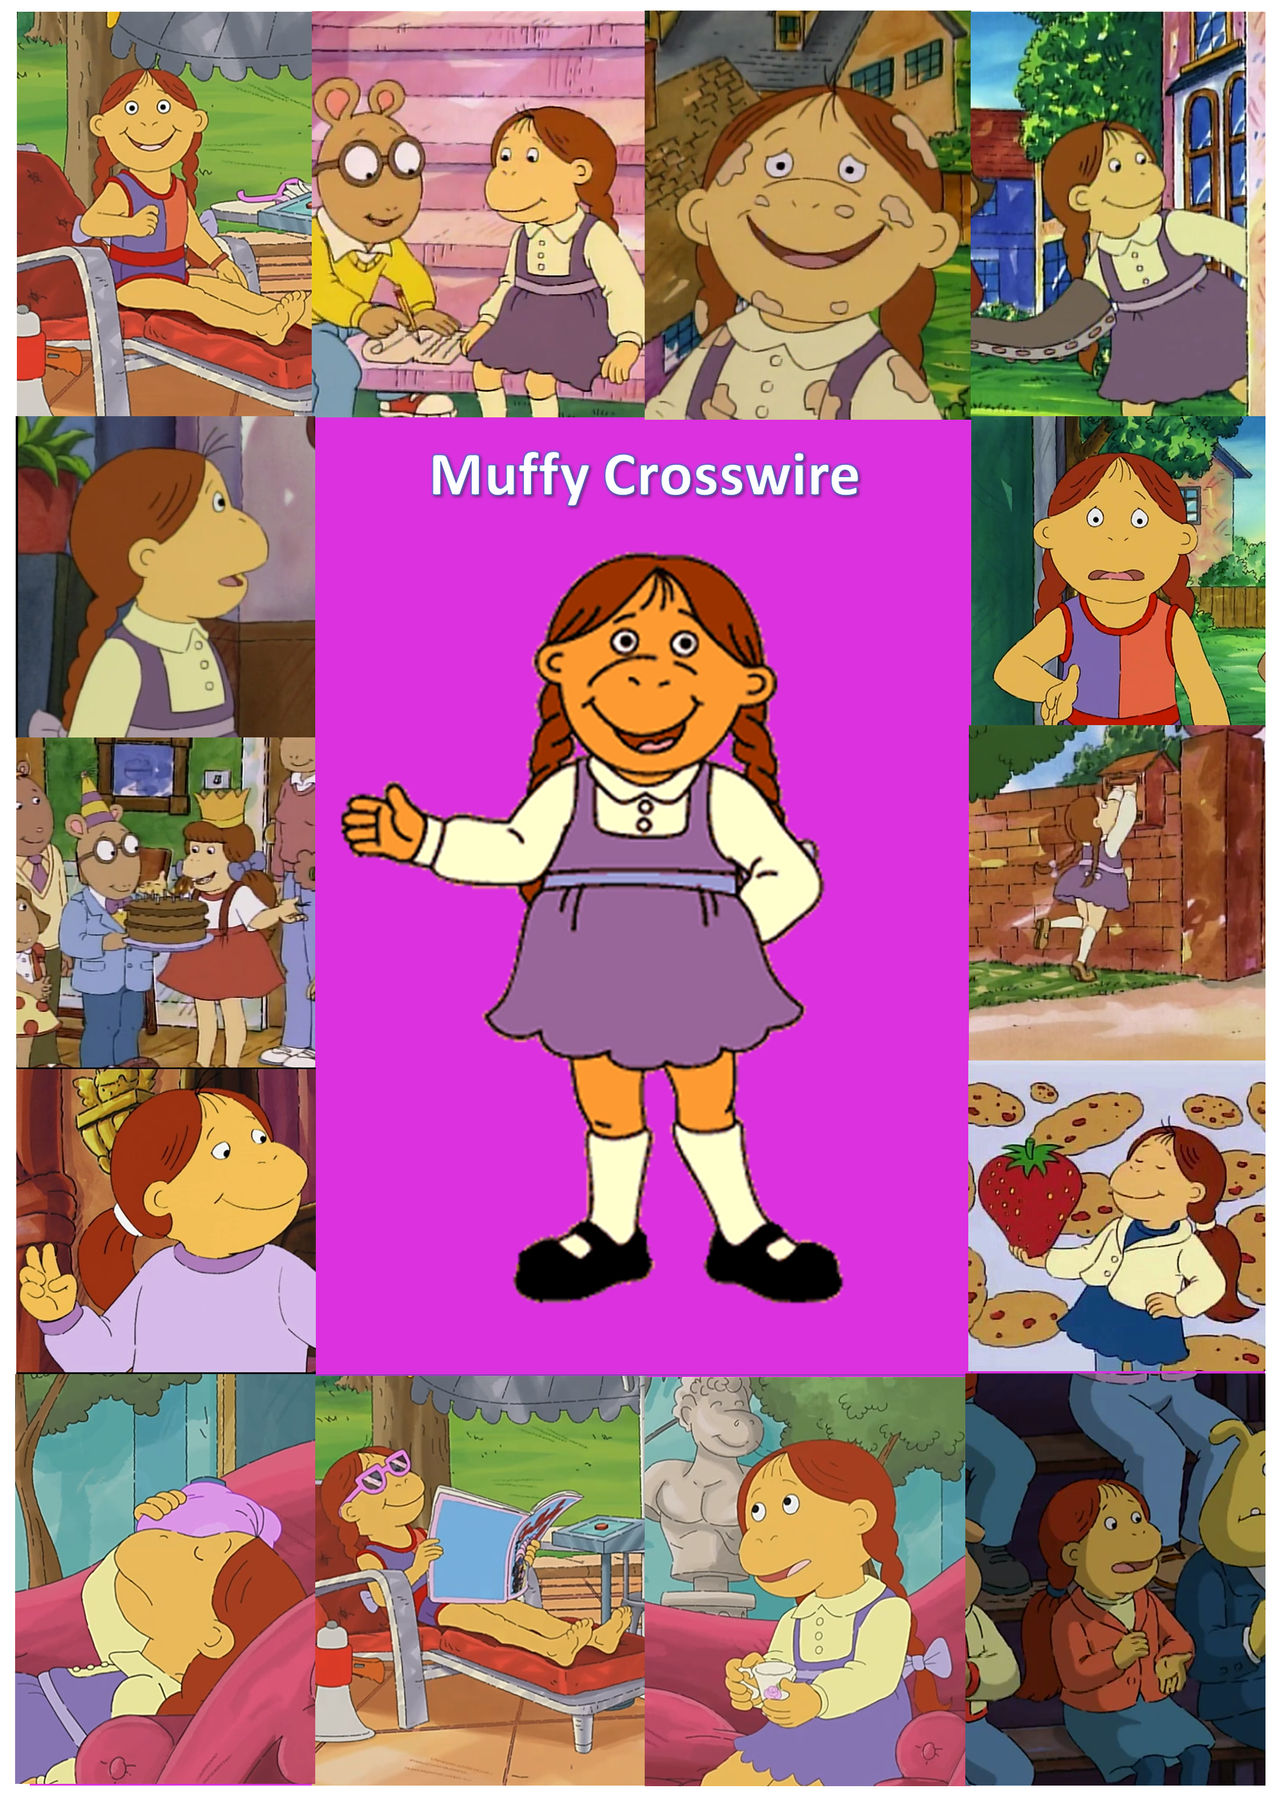 Arthur Characters - Muffy Crosswire by gikesmanners1995 on DeviantArt